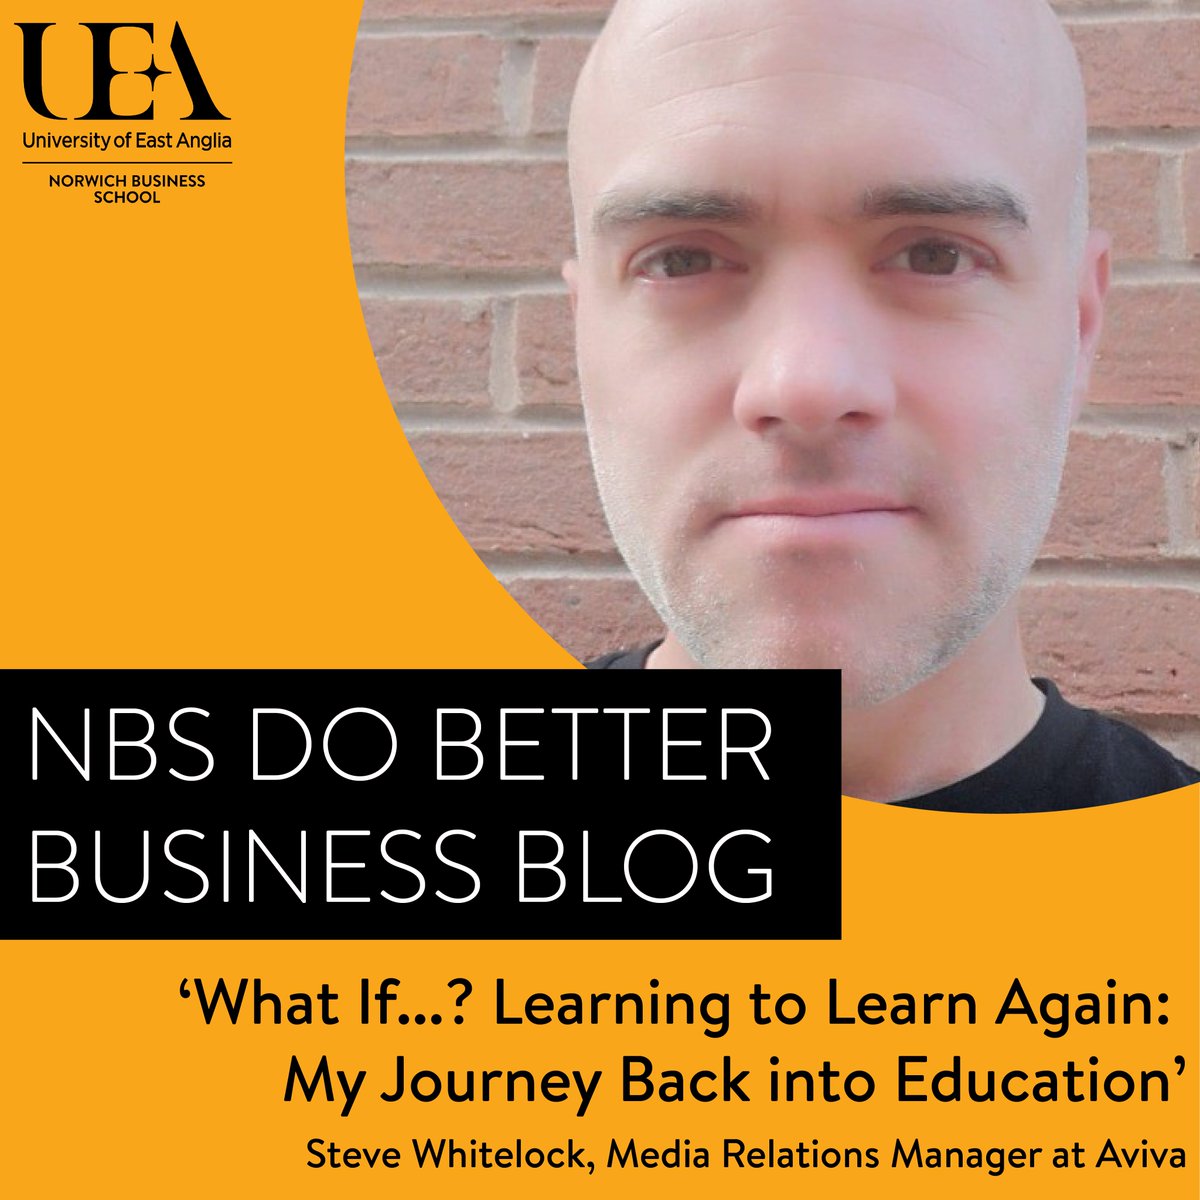 Steve Whitelock, Media Relations Manager at Aviva, recently undertook a Mini MBA at NBS. In this blog, Steve talks about his experience of going back into education after 30 years out of it, and how it kickstarted his desire to pursue it even further. shorturl.at/jptwZ